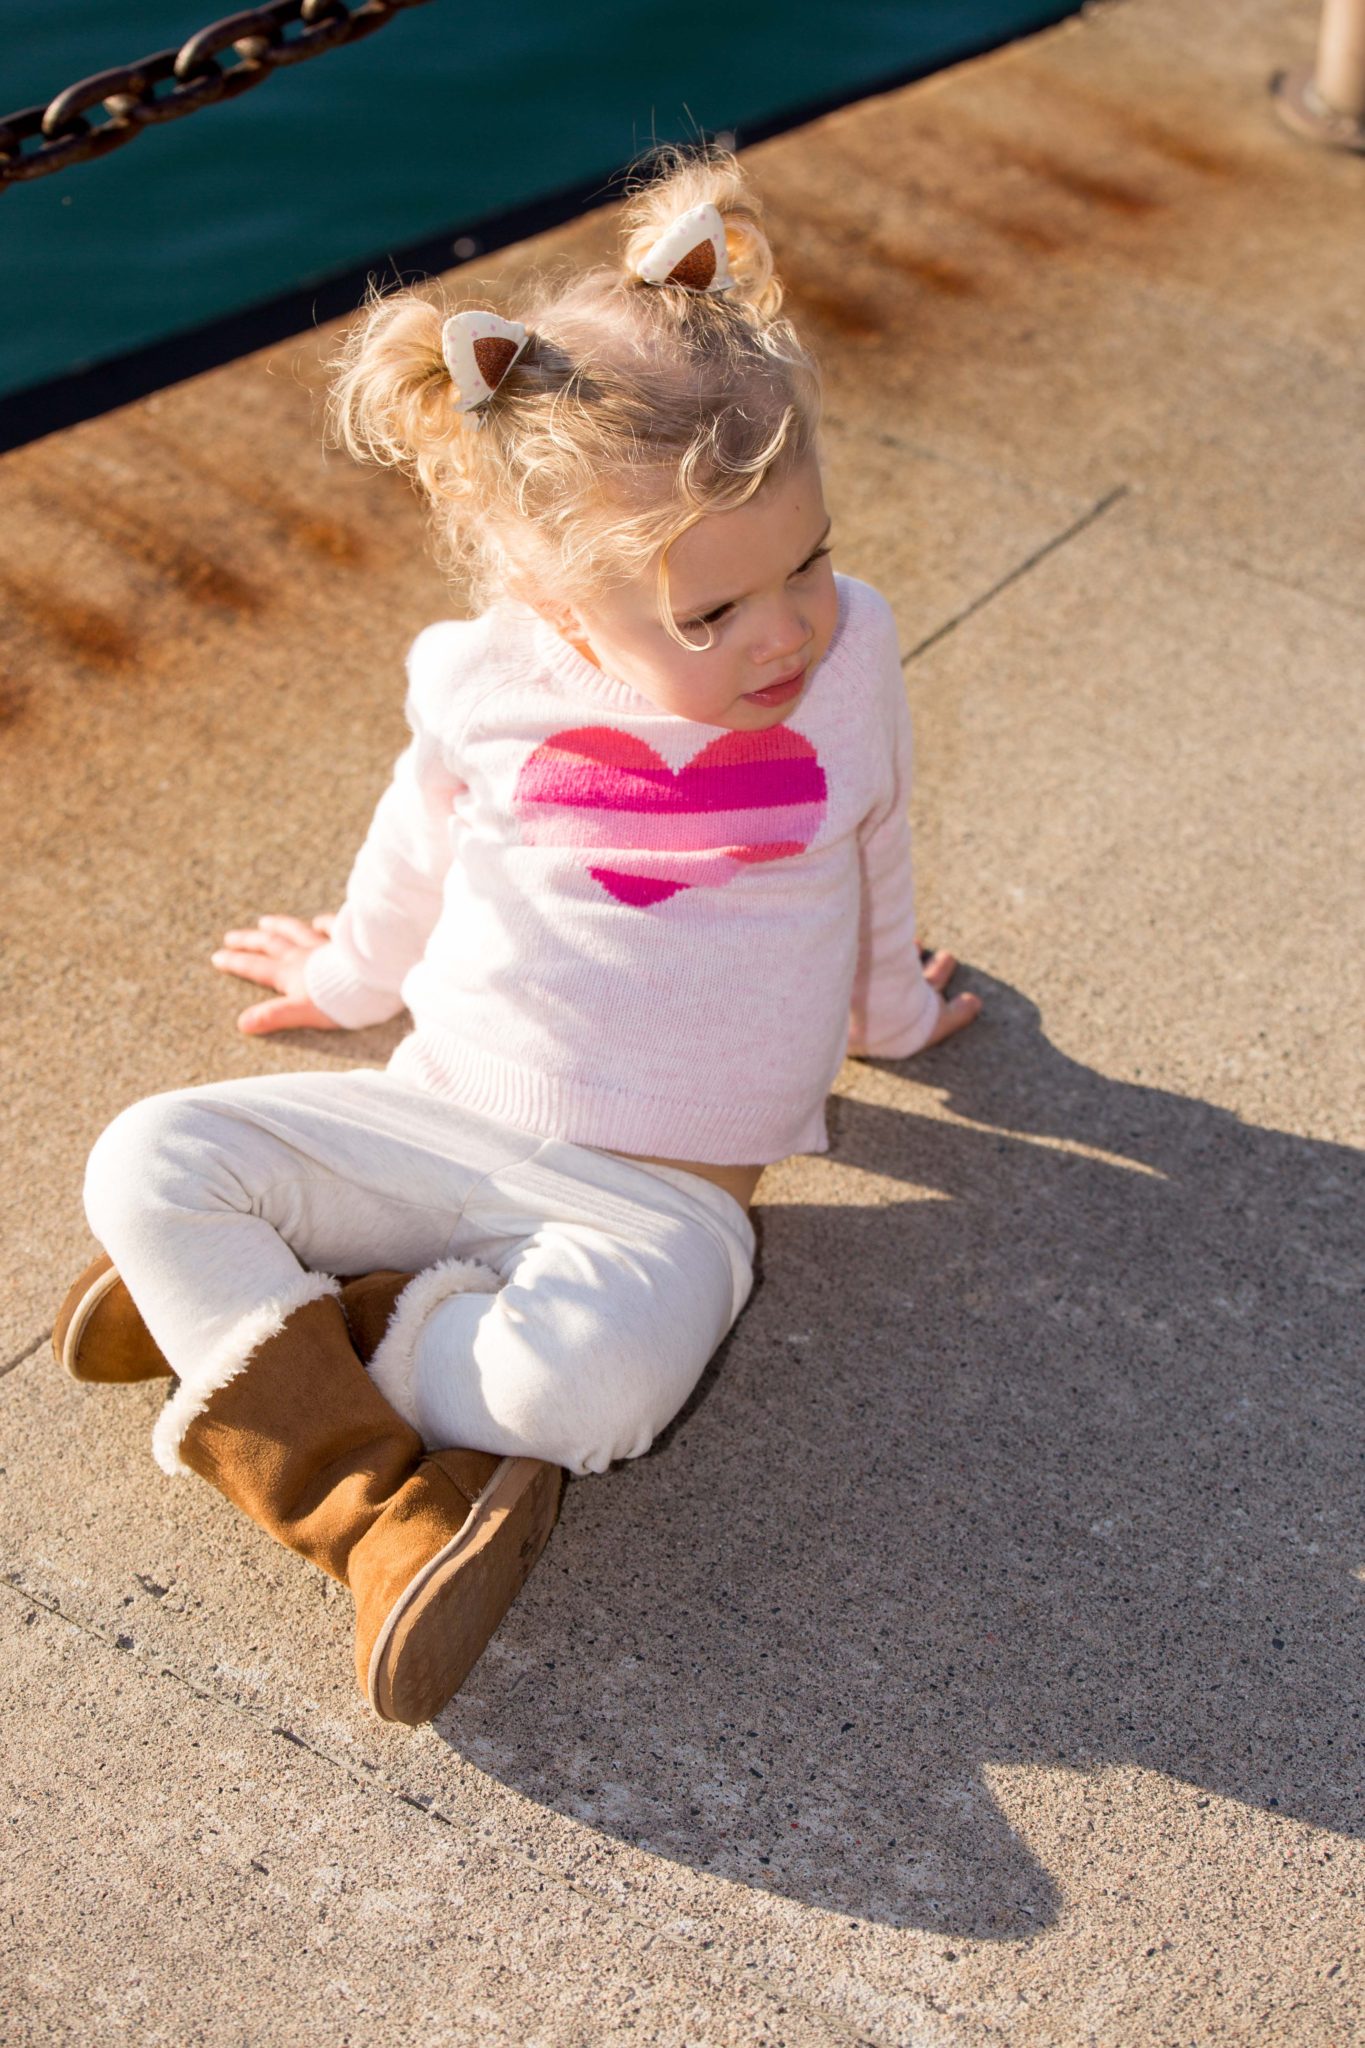 our holiday style with oshkosh b'gosh | how to dress a toddler for holiday photos on allweareblog.com